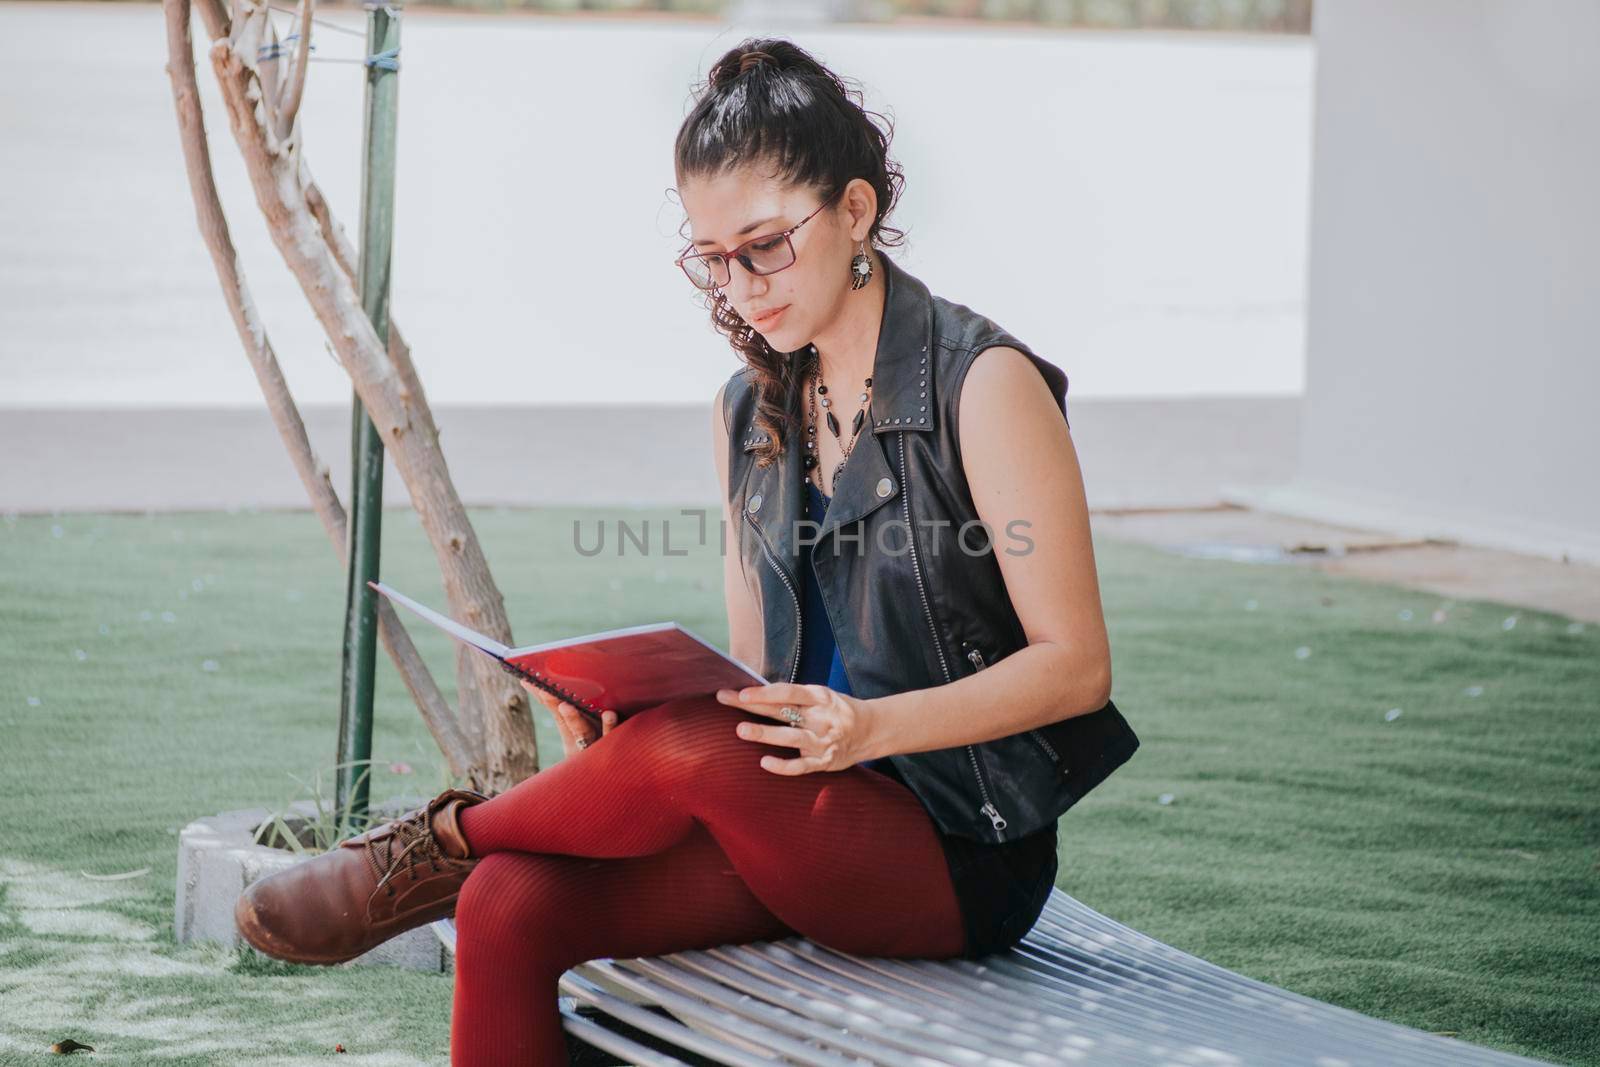 Urban girl sitting on a bench reading a book, Latin girl reading a book outside, concept of a student girl reading a book by isaiphoto